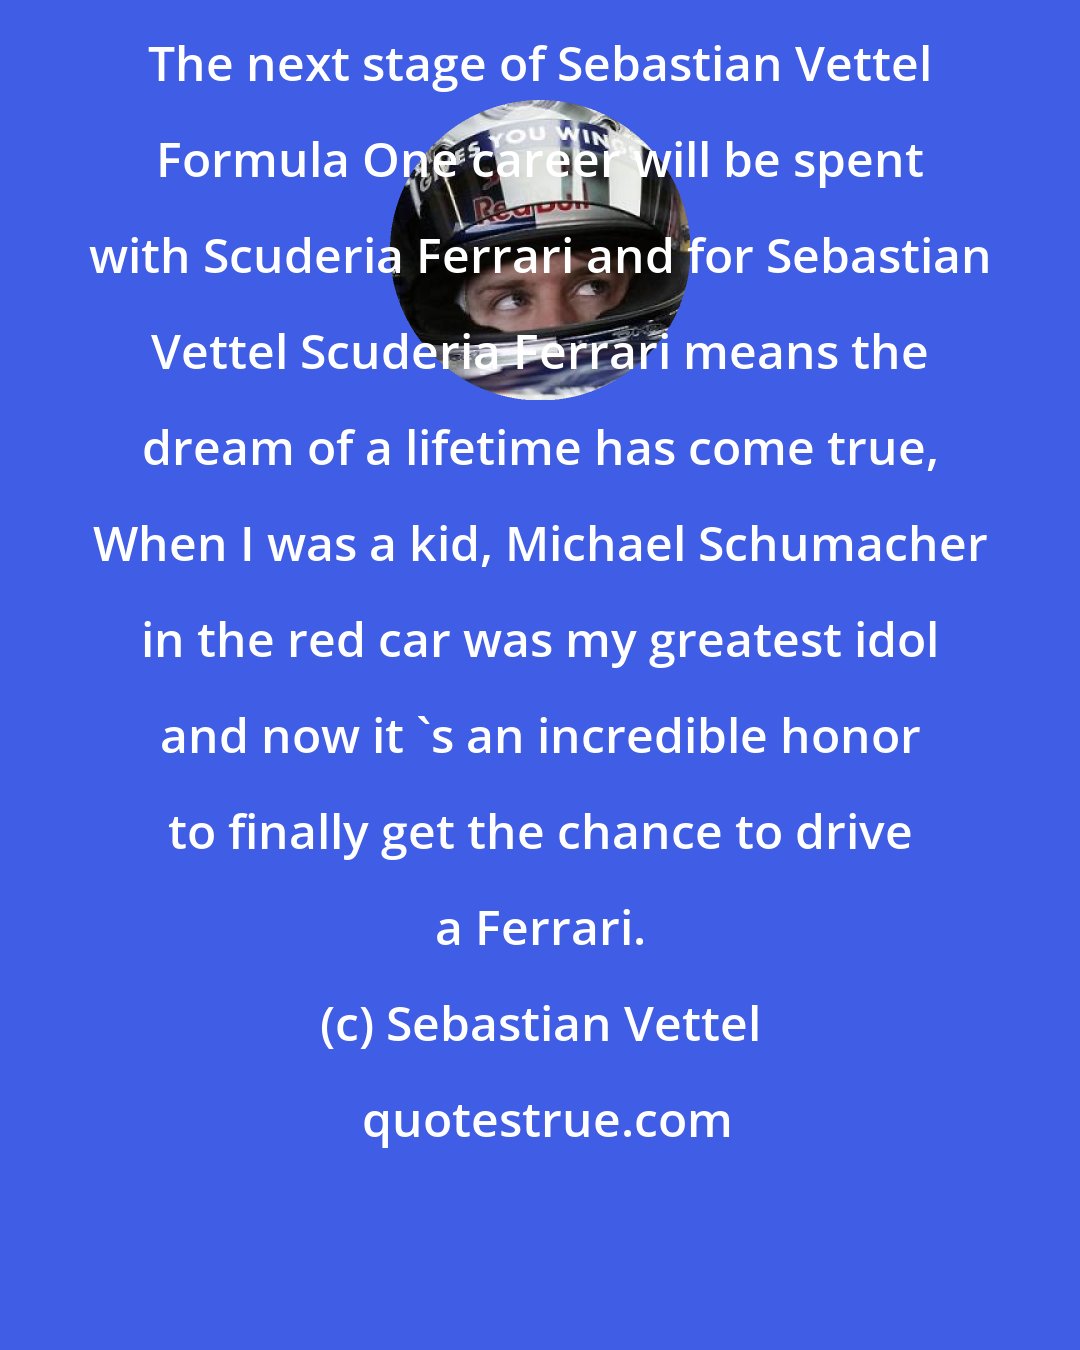 Sebastian Vettel: The next stage of Sebastian Vettel Formula One career will be spent with Scuderia Ferrari and for Sebastian Vettel Scuderia Ferrari means the dream of a lifetime has come true, When I was a kid, Michael Schumacher in the red car was my greatest idol and now it 's an incredible honor to finally get the chance to drive a Ferrari.